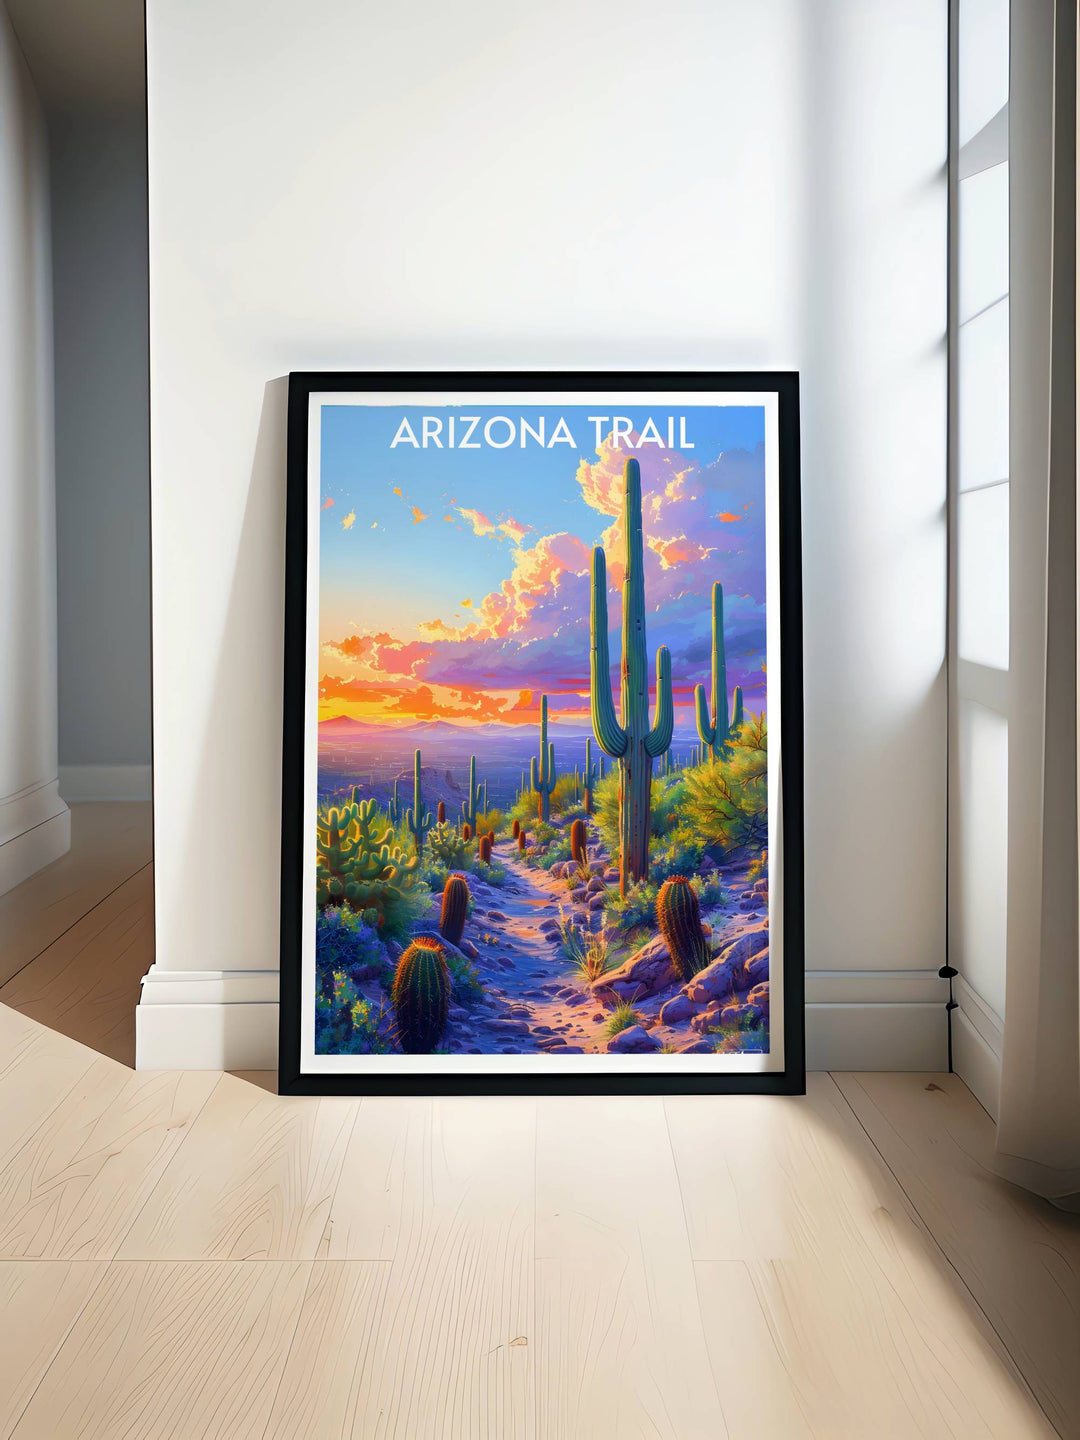 Stunning artwork featuring the Pacific Crest Trail and Saguaro National Park capturing the essence of Americas iconic trails perfect for home decor or gifts for outdoor enthusiasts and hikers bringing nature's beauty into your space.